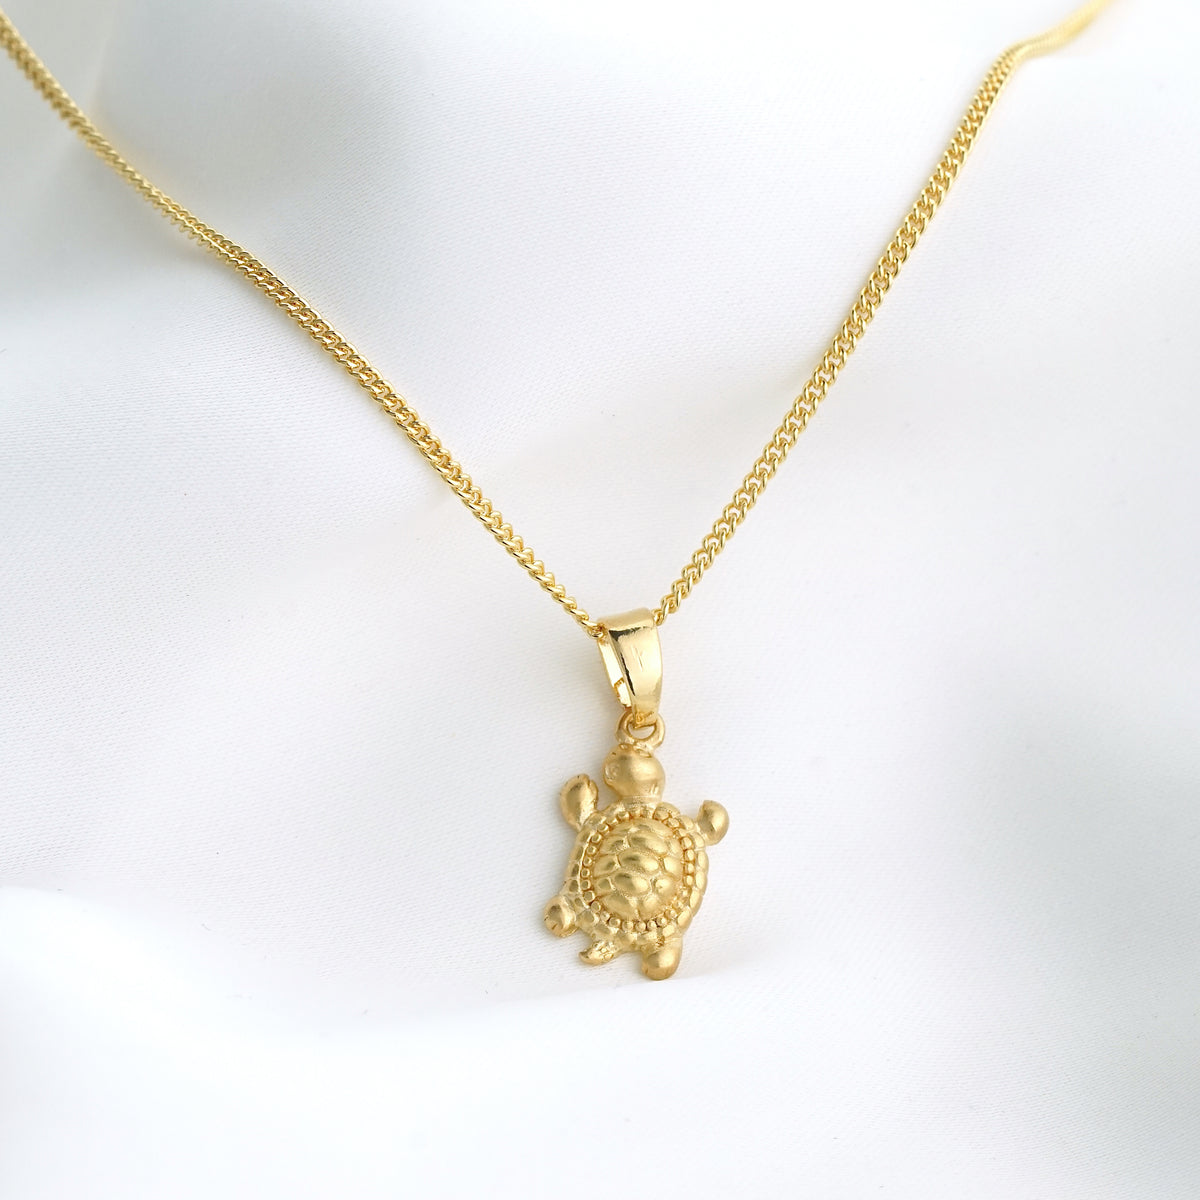 Small Golden Turtle Necklace